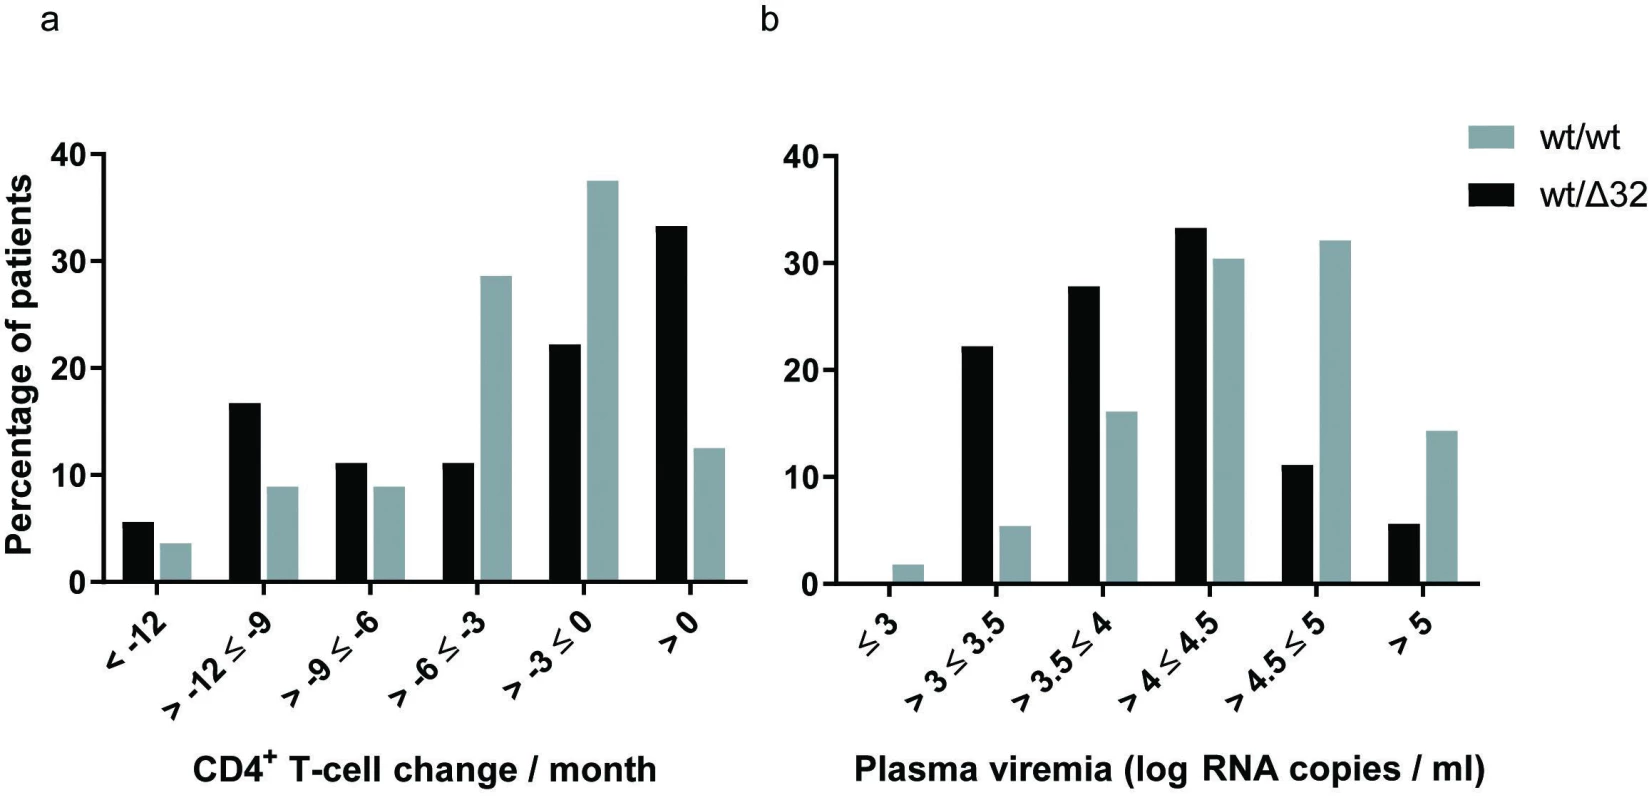 The CCR5 genotype and disease progression for antiretroviral therapy-naive patients with more than 1-year of follow-up
The probability distributions of the CD4+ T-cell change per month (a) and plasma viremia levels (b) are depicted for the wild-type
homozygotes (n = 56; grey bars) and CCR5Δ32 heterozygotes (n = 18; black bars). n – number of patients.